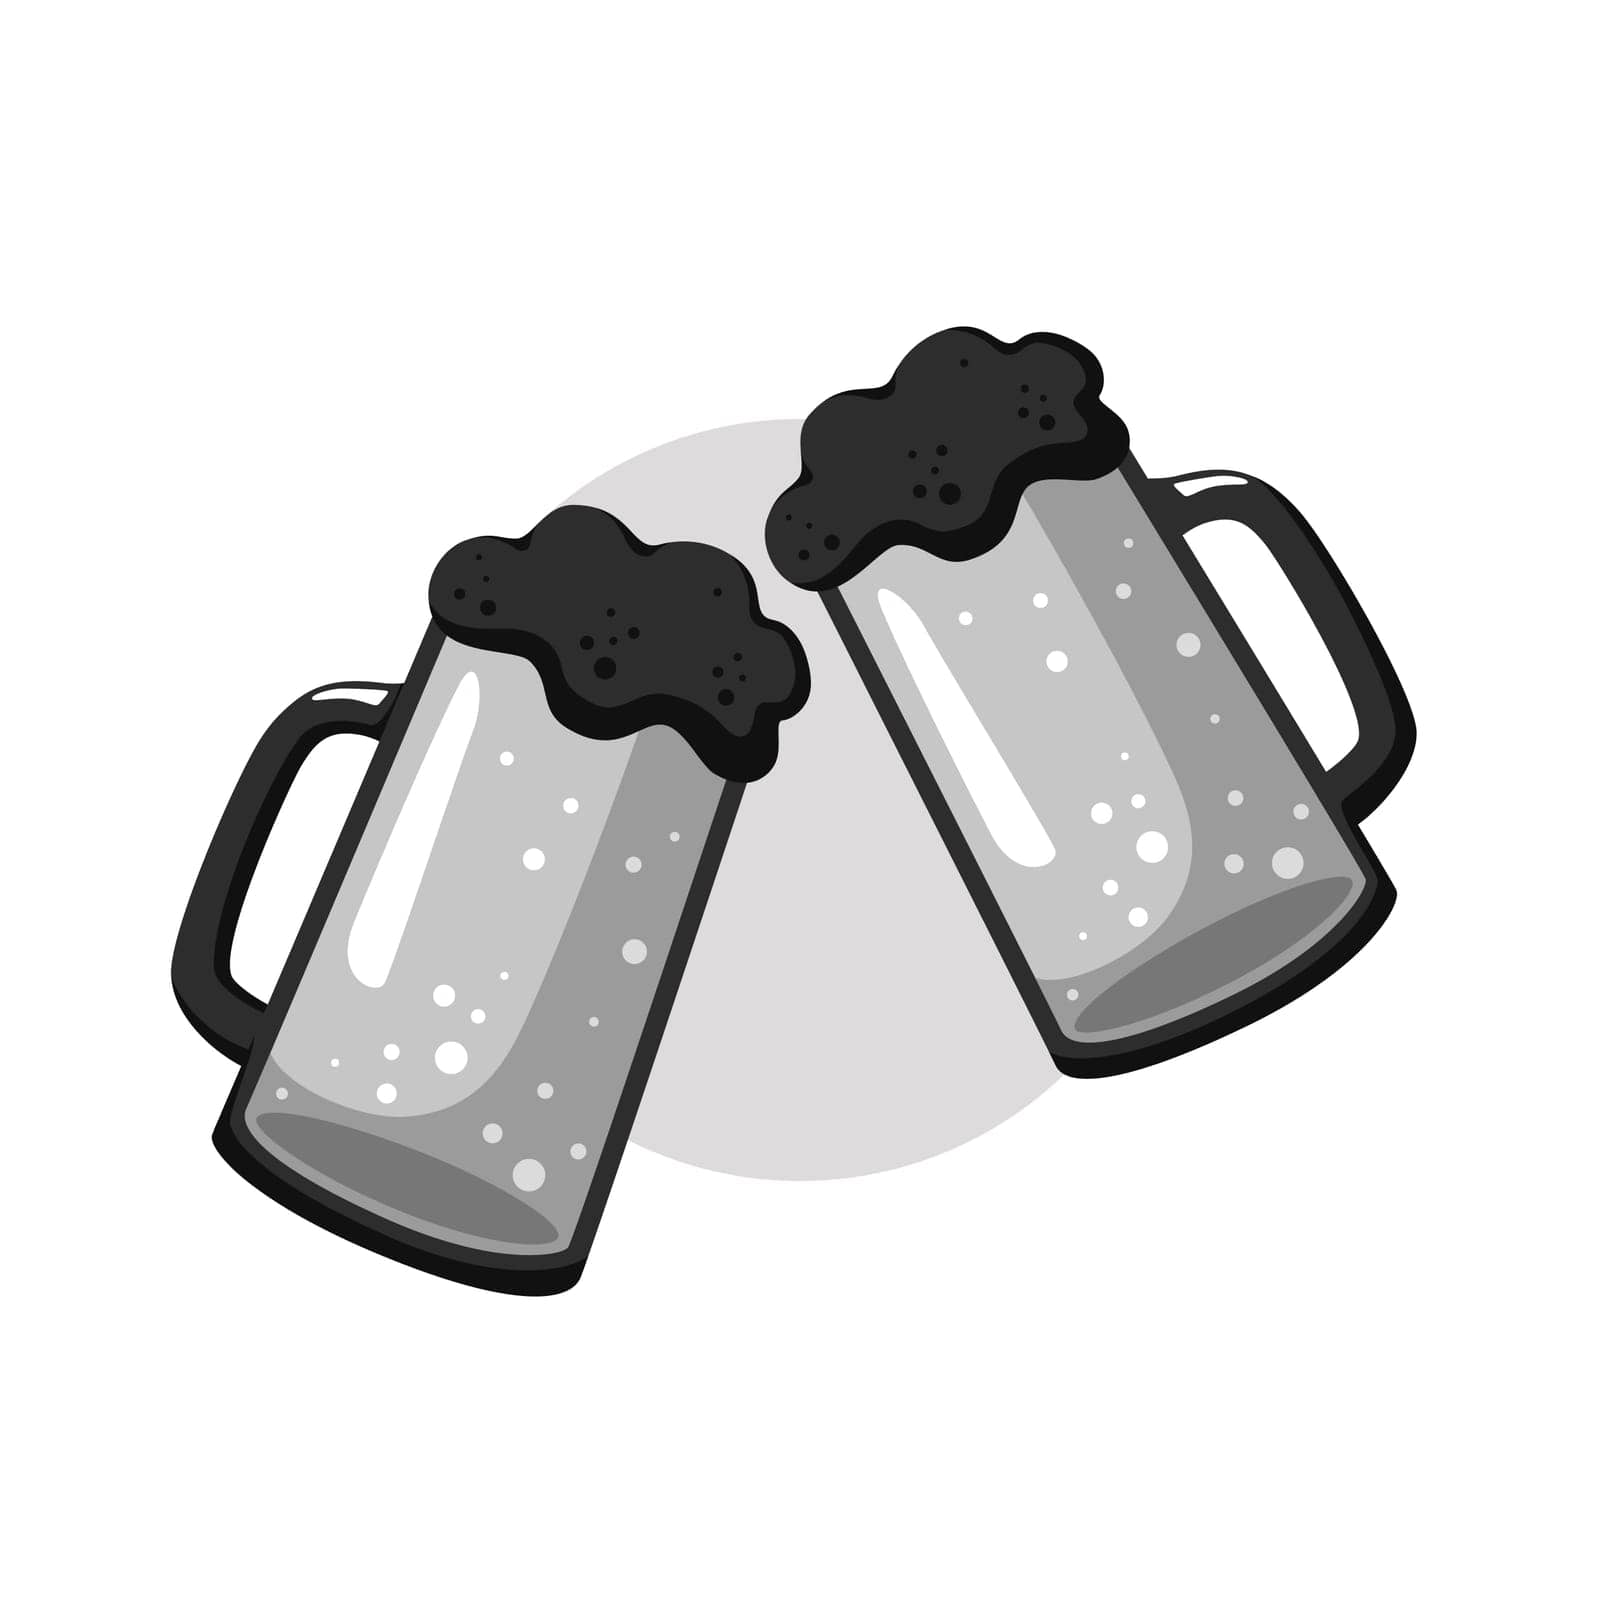 Two beers with foam black white on white background isolated vector illustration of alcohol